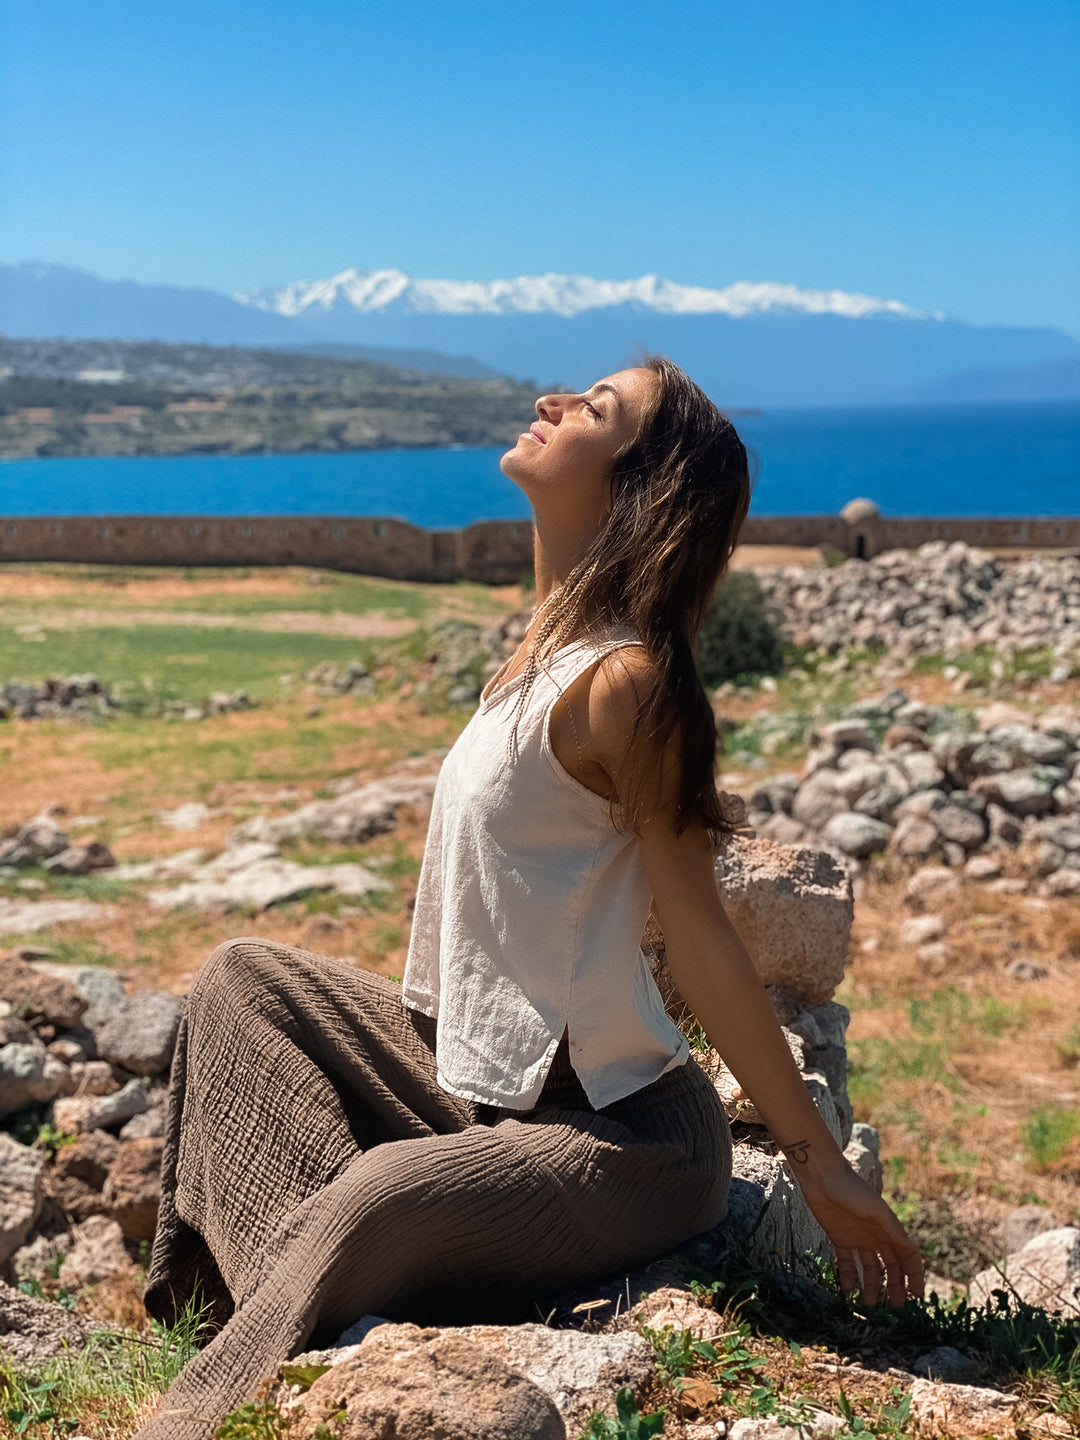 Female model sits on rocks with face angled up to the sky. There is a backdrop of green grass, rocks, water and mountains. She is wearing an un-dyed tank top and long brown gauze pants.